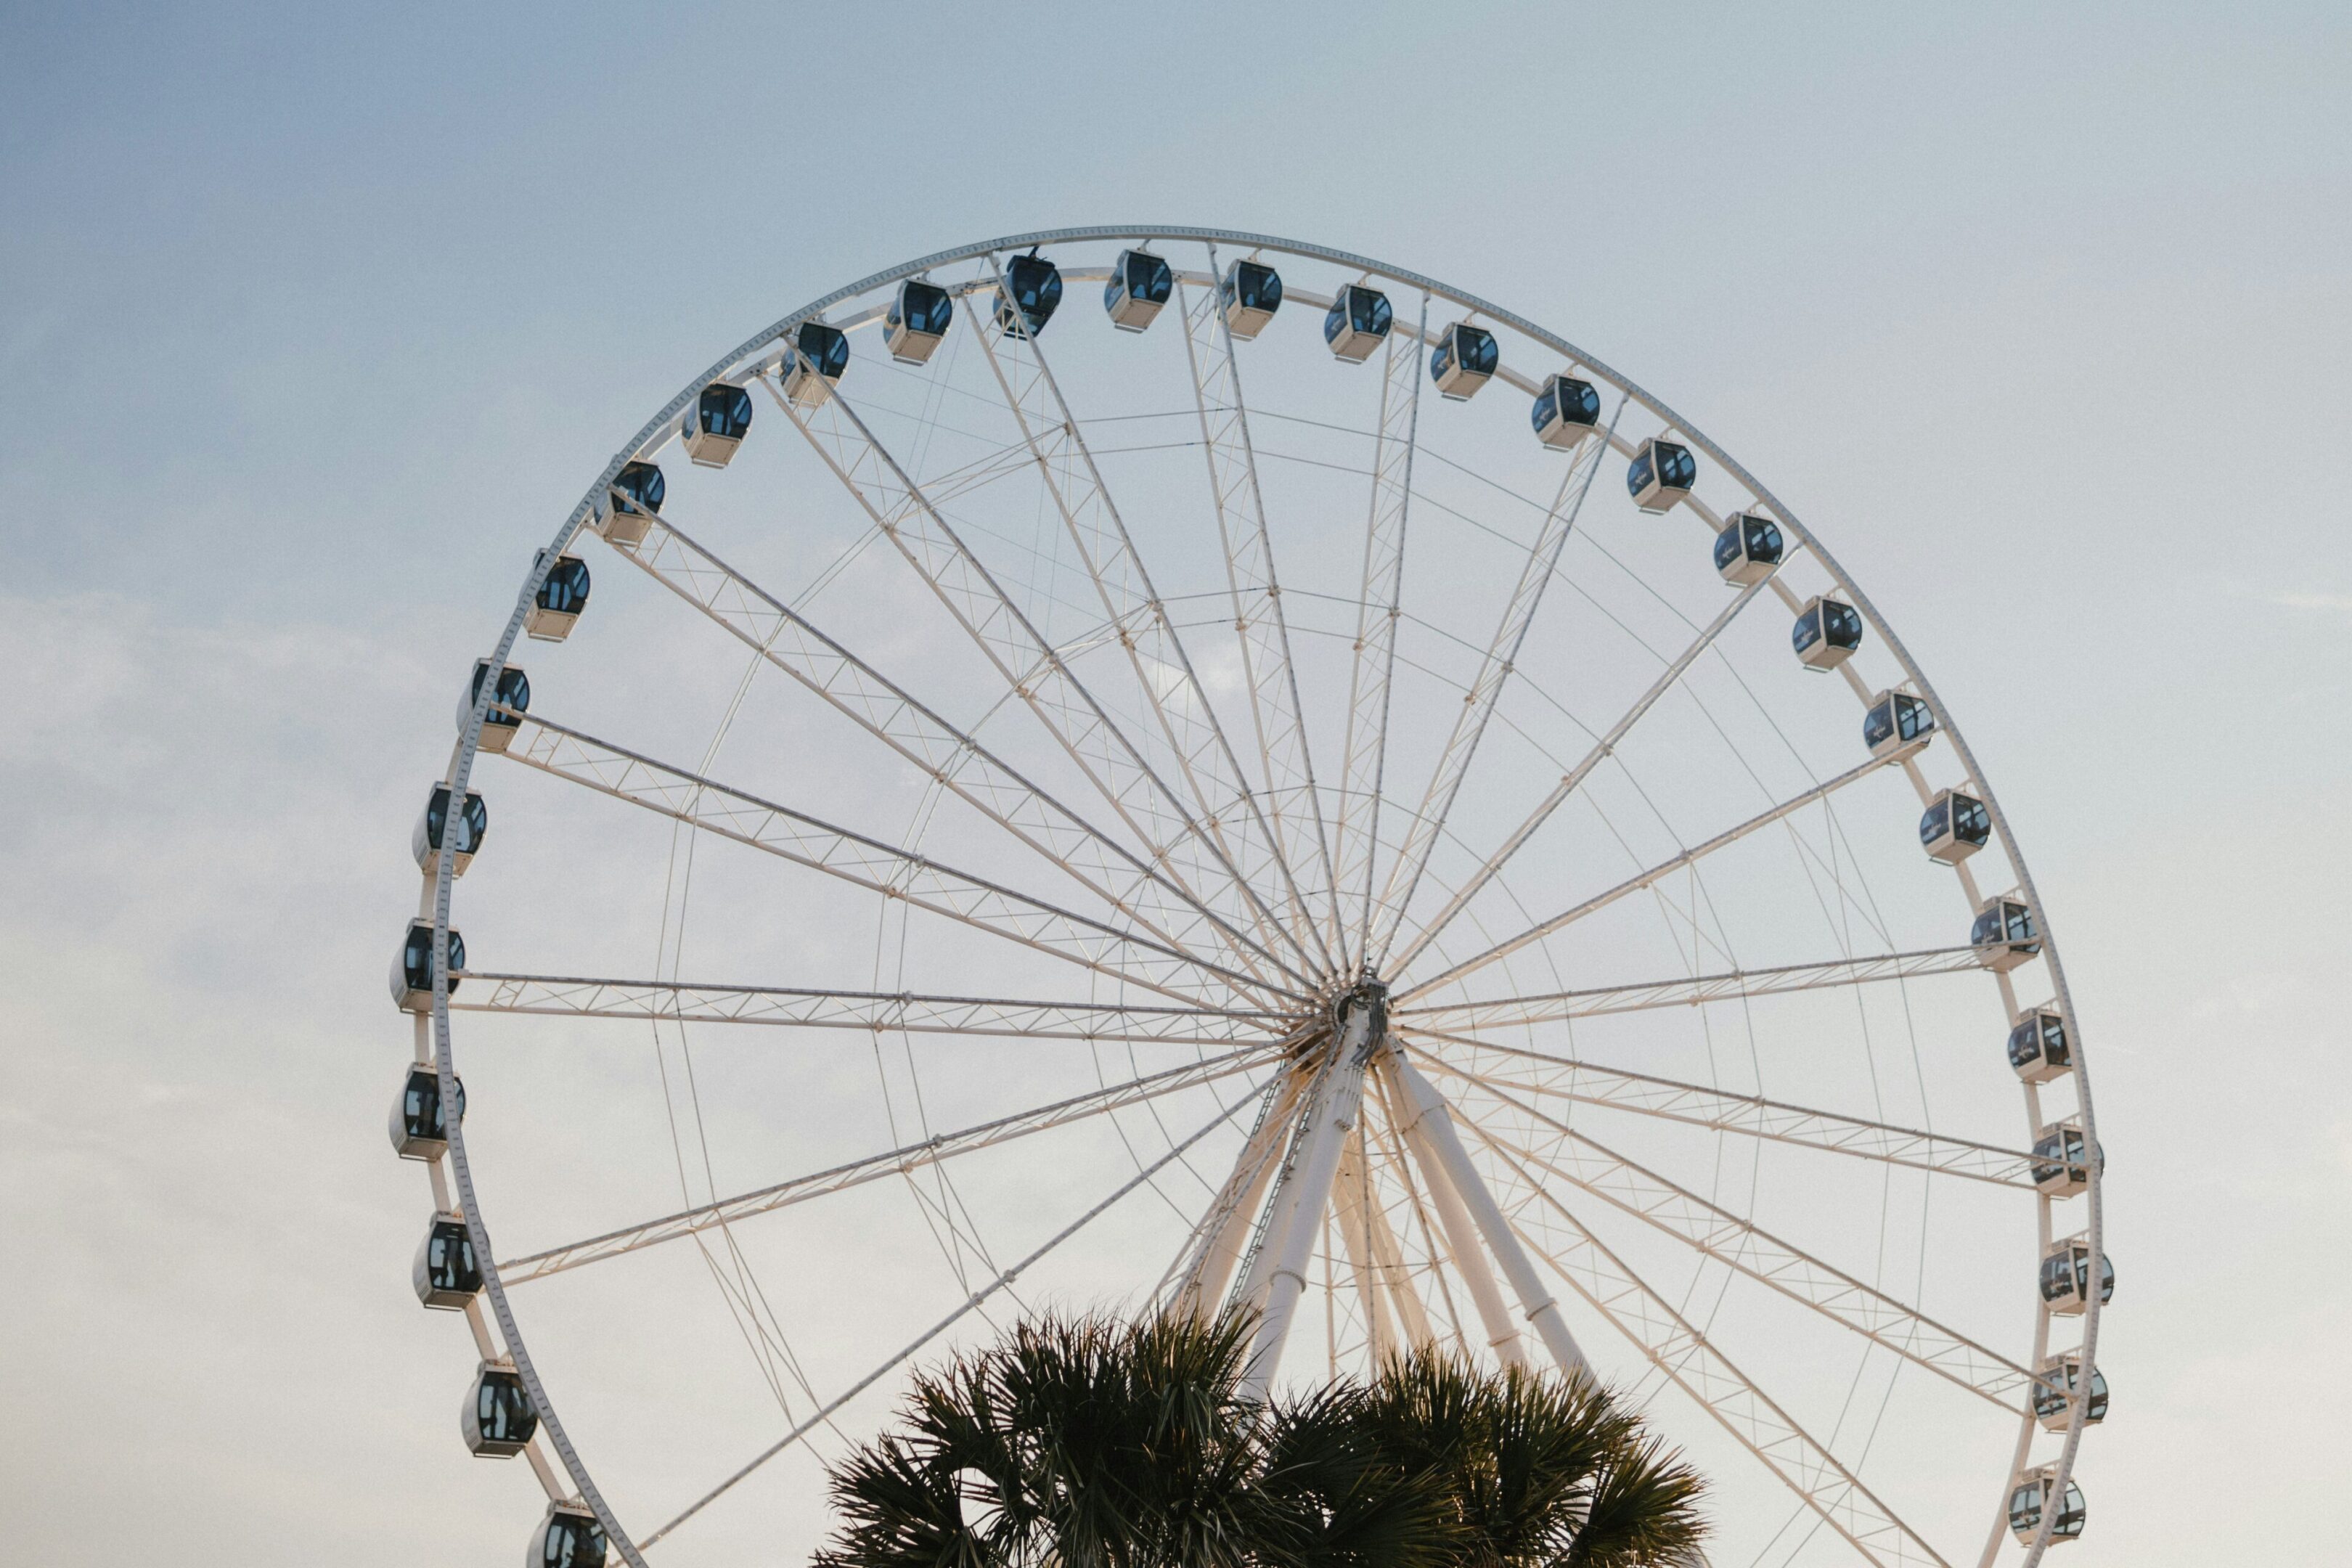 A ferris wheel with a sky background